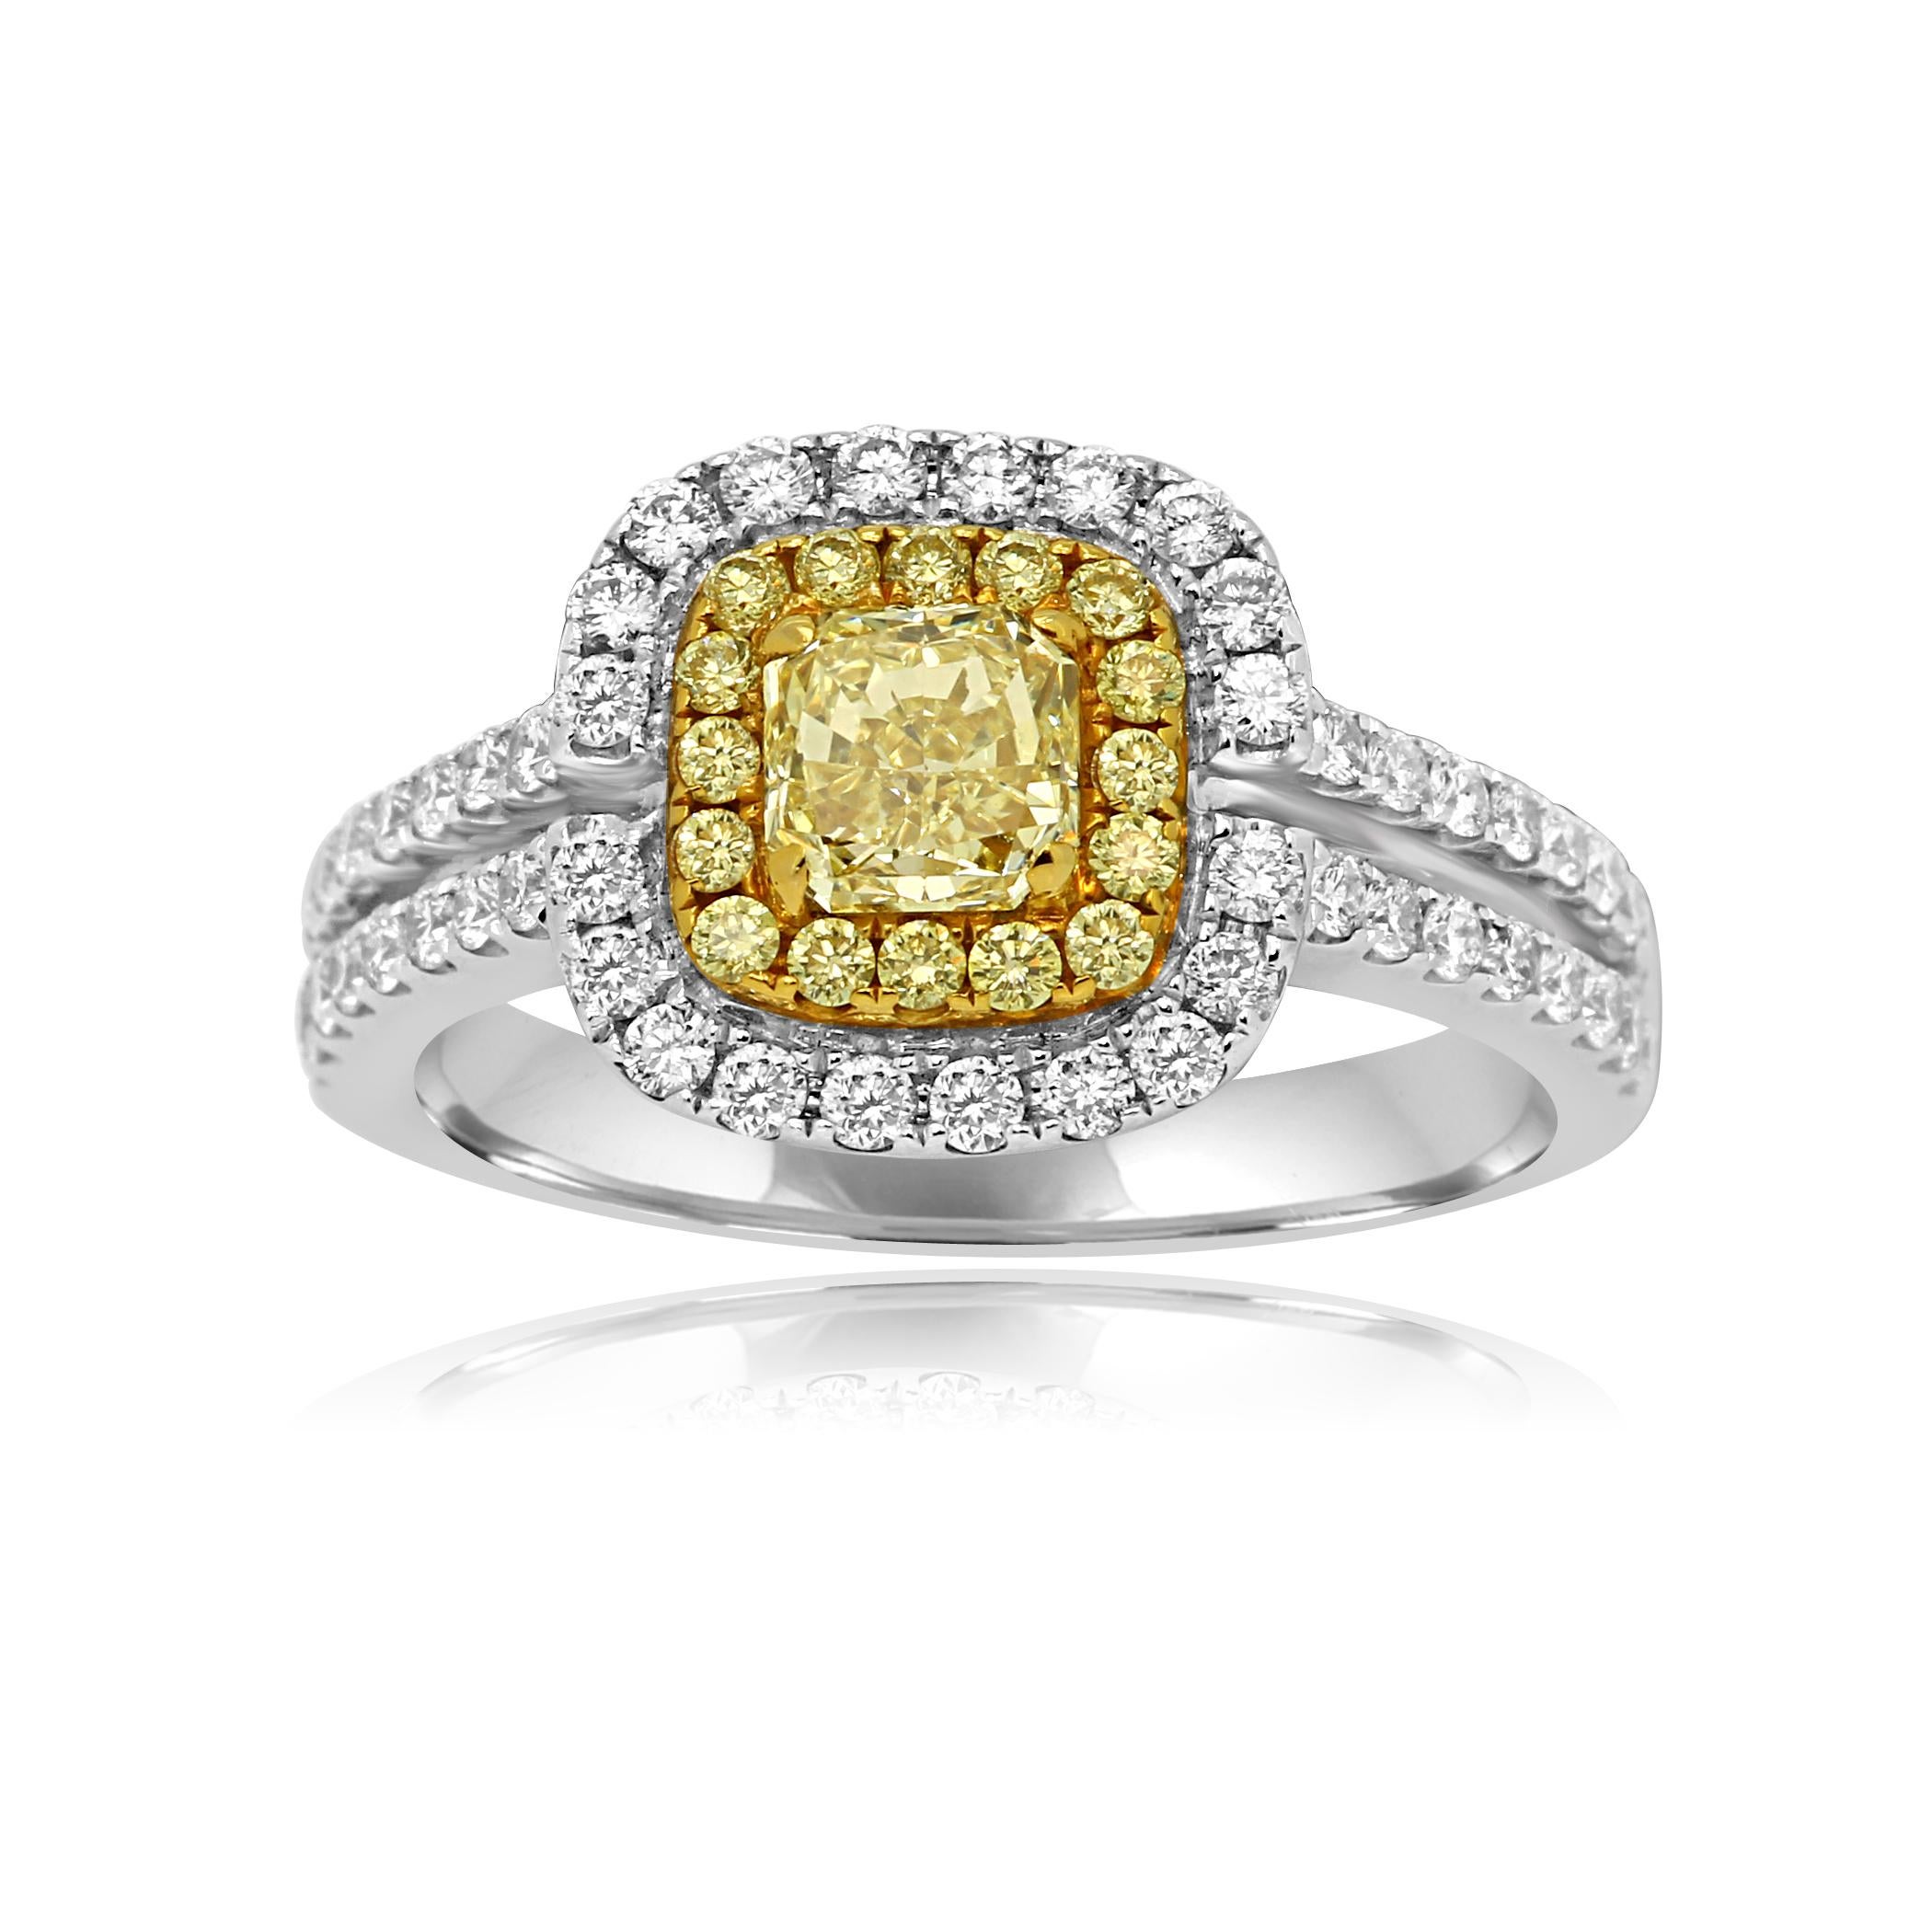 Gorgeous Natural Fancy Yellow Diamond Square Radiant Cut VS-SI Clarity 0.73 Carat Encircled in a Double Halo of Natural Fancy Yellow Round Brilliant Diamonds VS-SI Clarity 0.17 Carat and White Colorless Round Brilliant Diamonds VS-SI Clarity 0.58